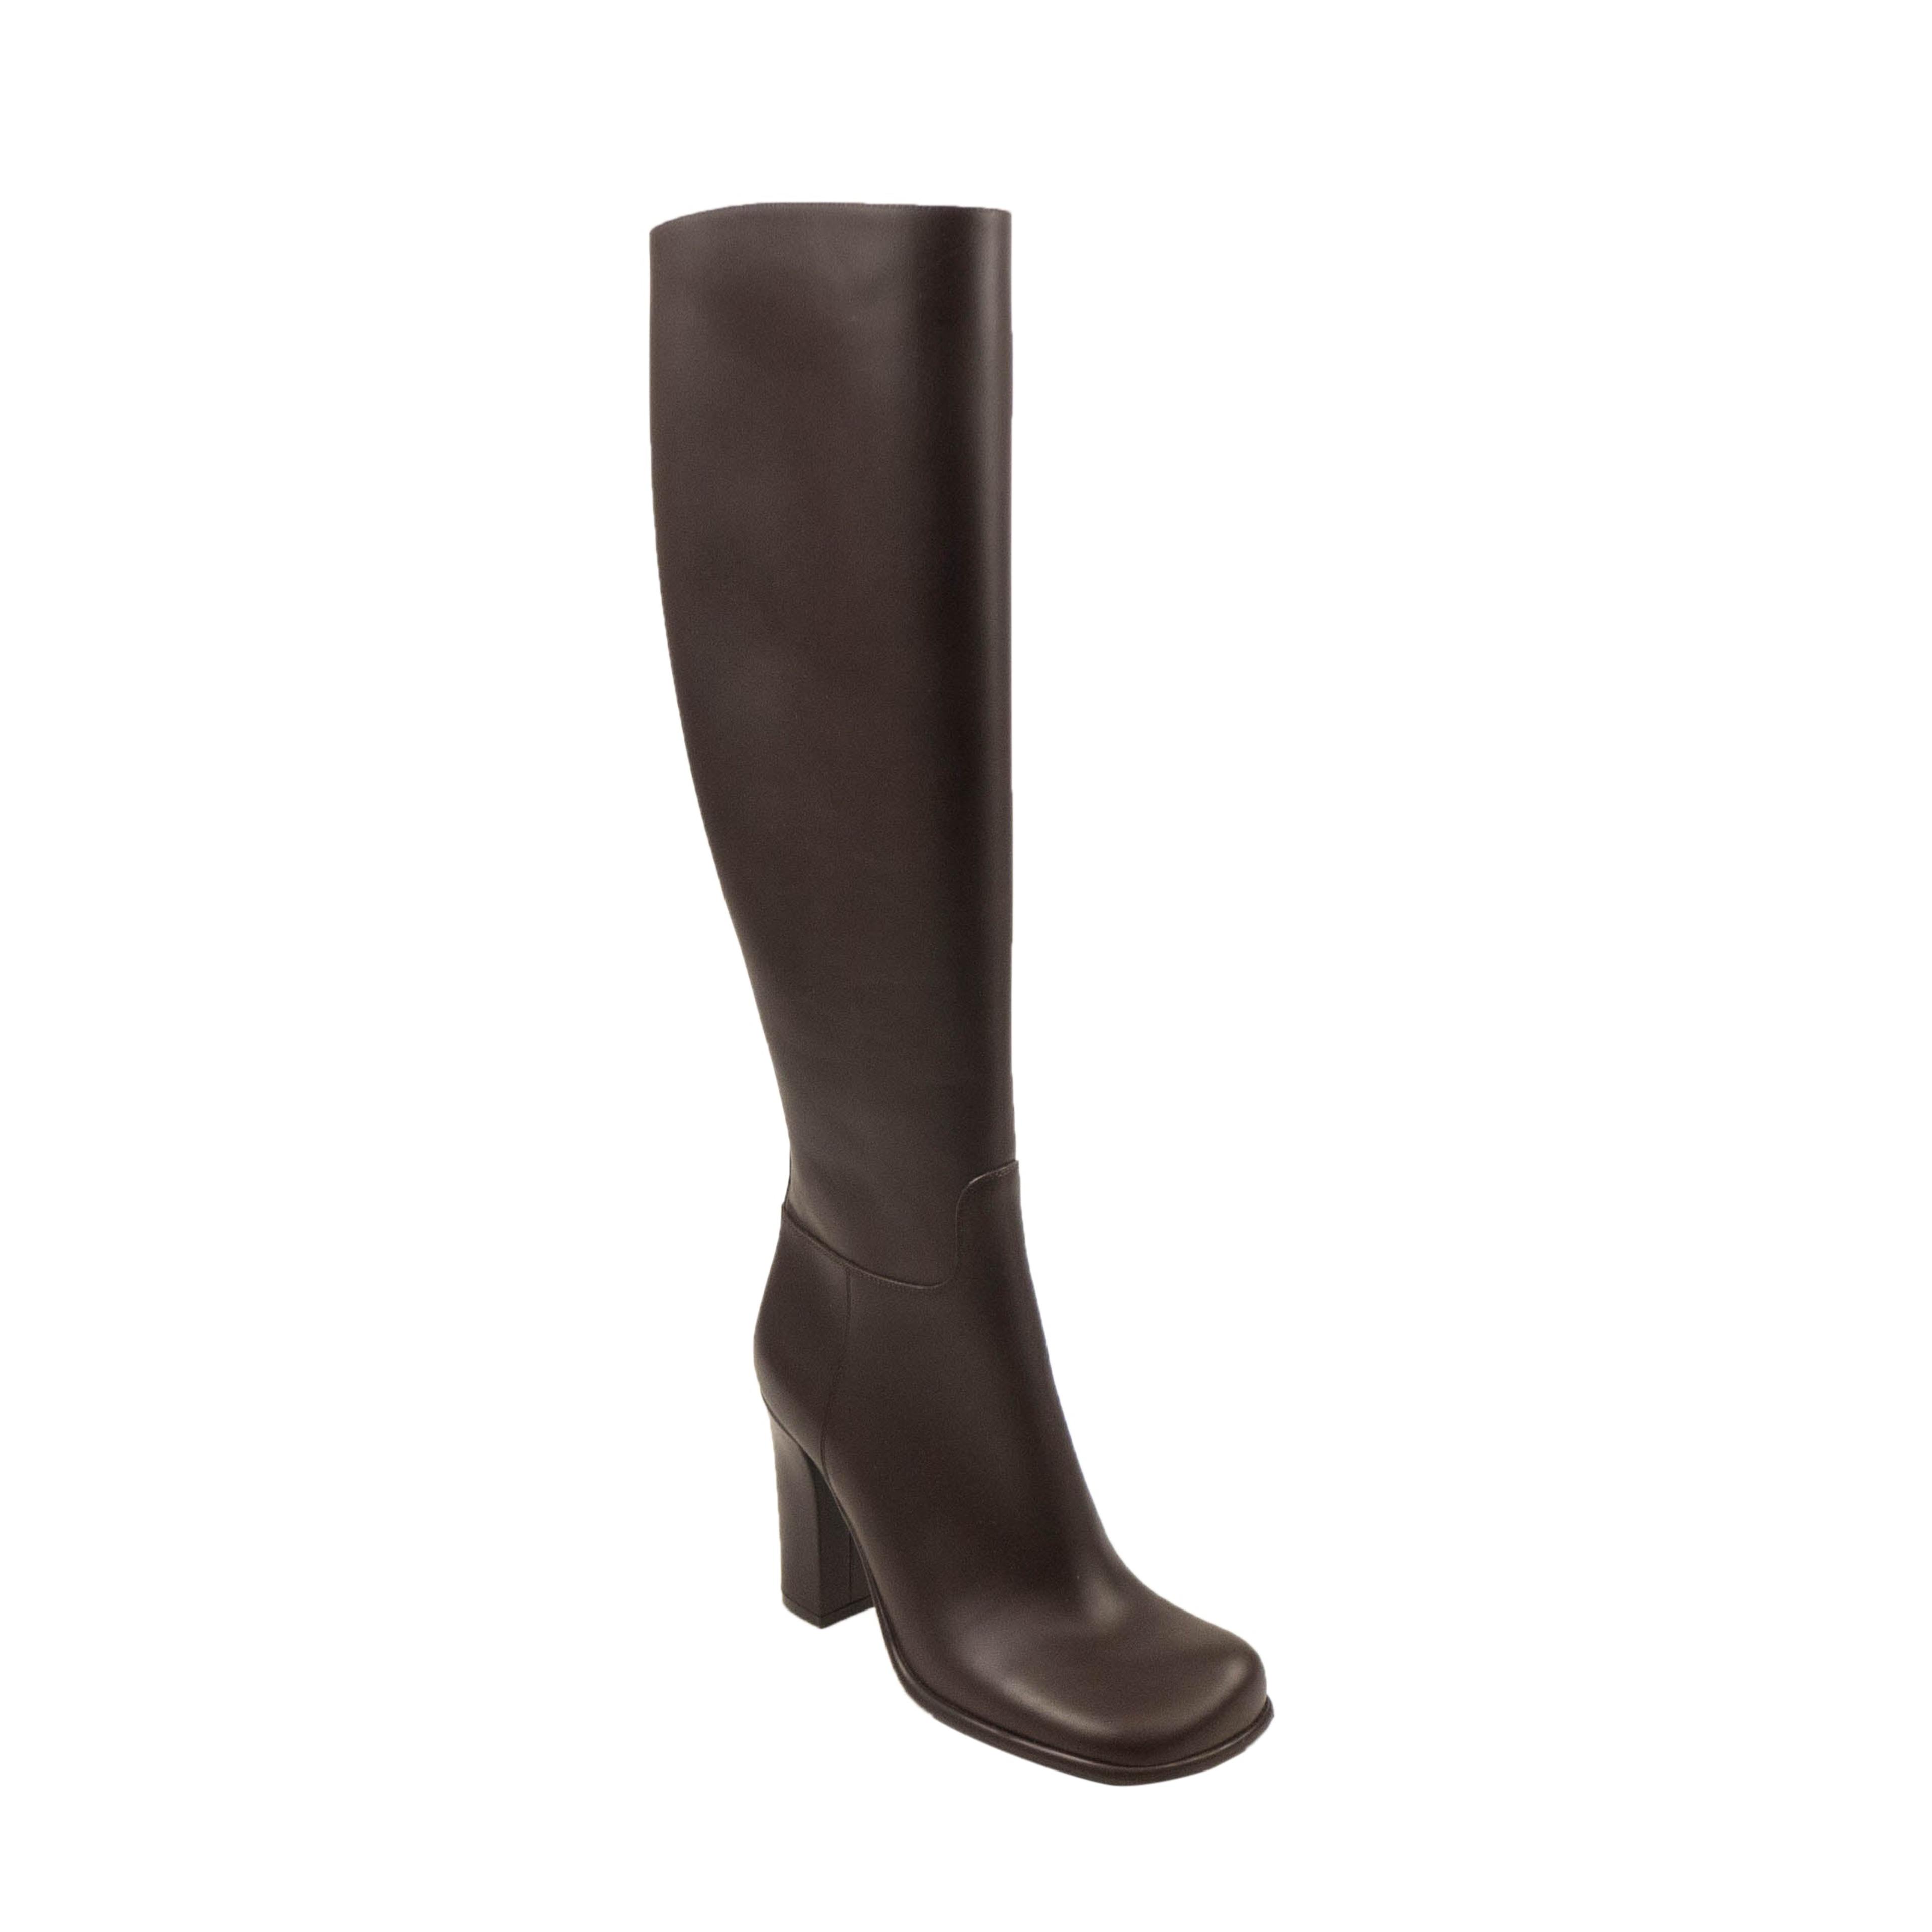 Alternate View 1 of Brown Storm Square Toe Knee High Boots